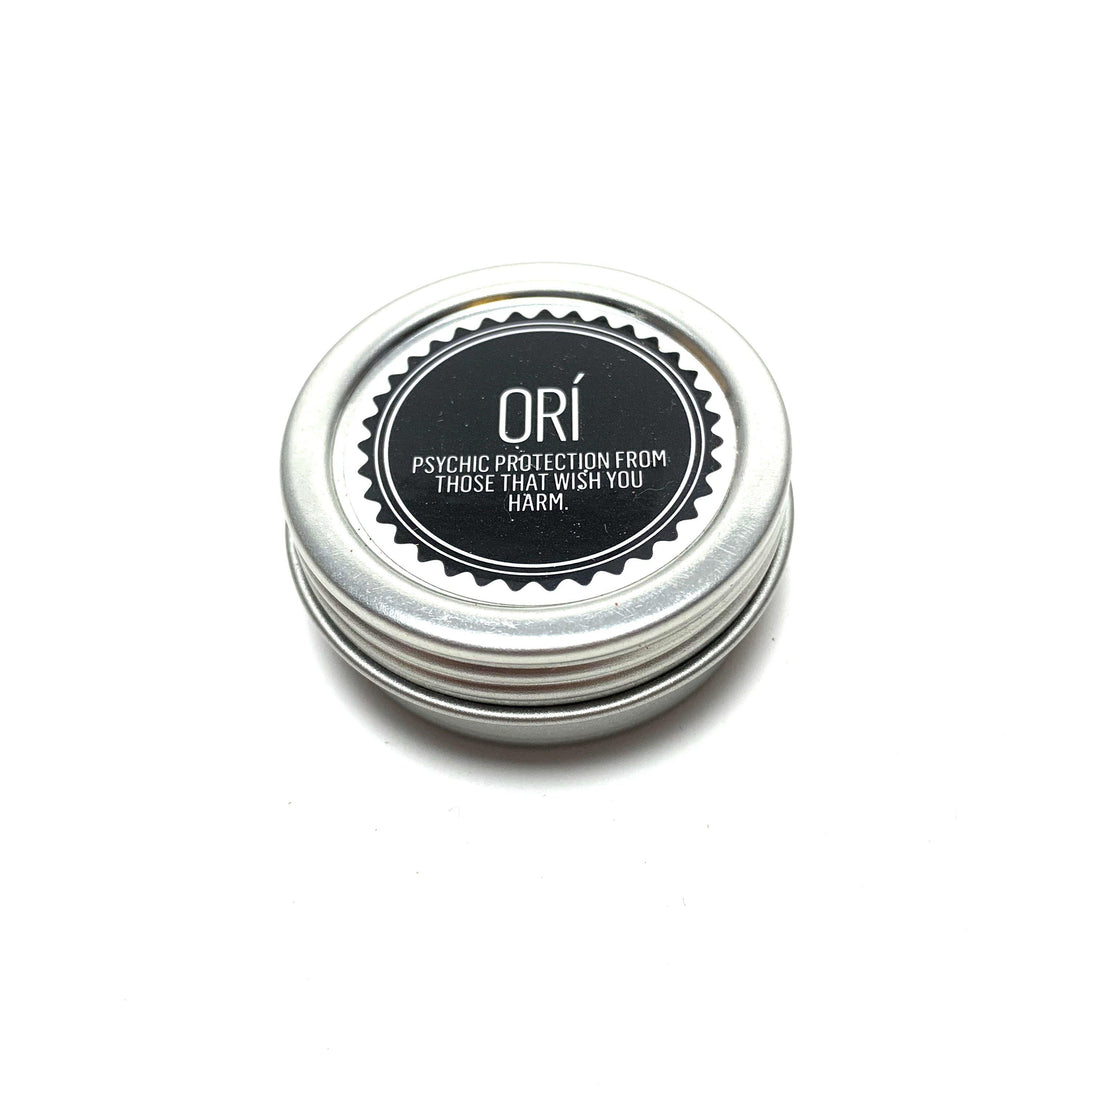 Ori Incense Blend HOI Incense Blend House of Intuition $6.00 Tiny Tin .5 oz 